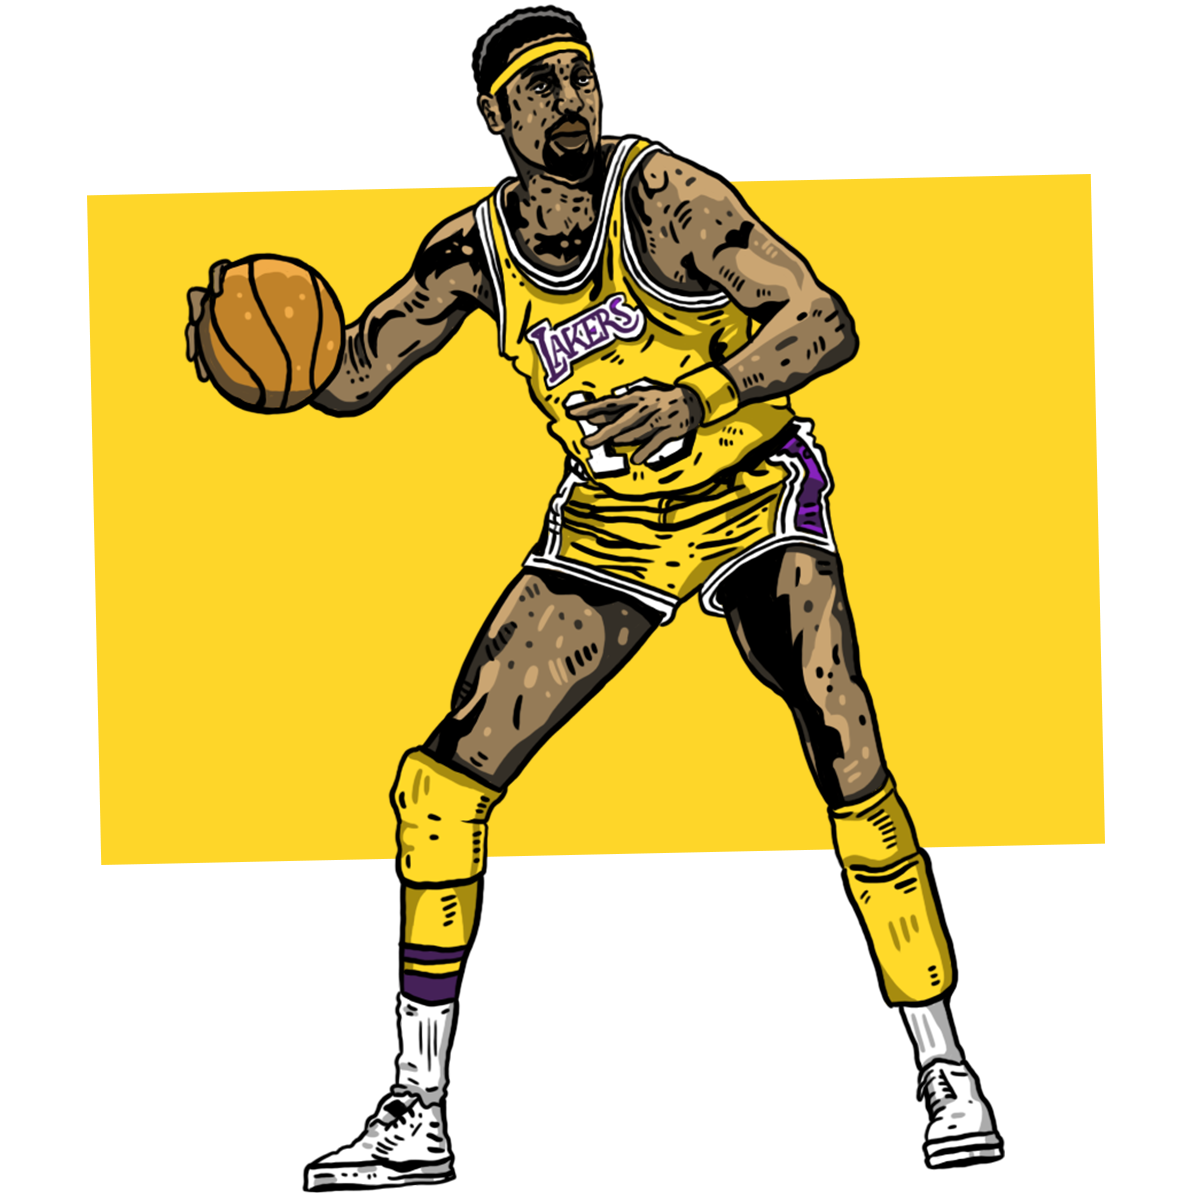 Illustration of Wilt Chamberlain in a yellow jersey dribbling a ball.